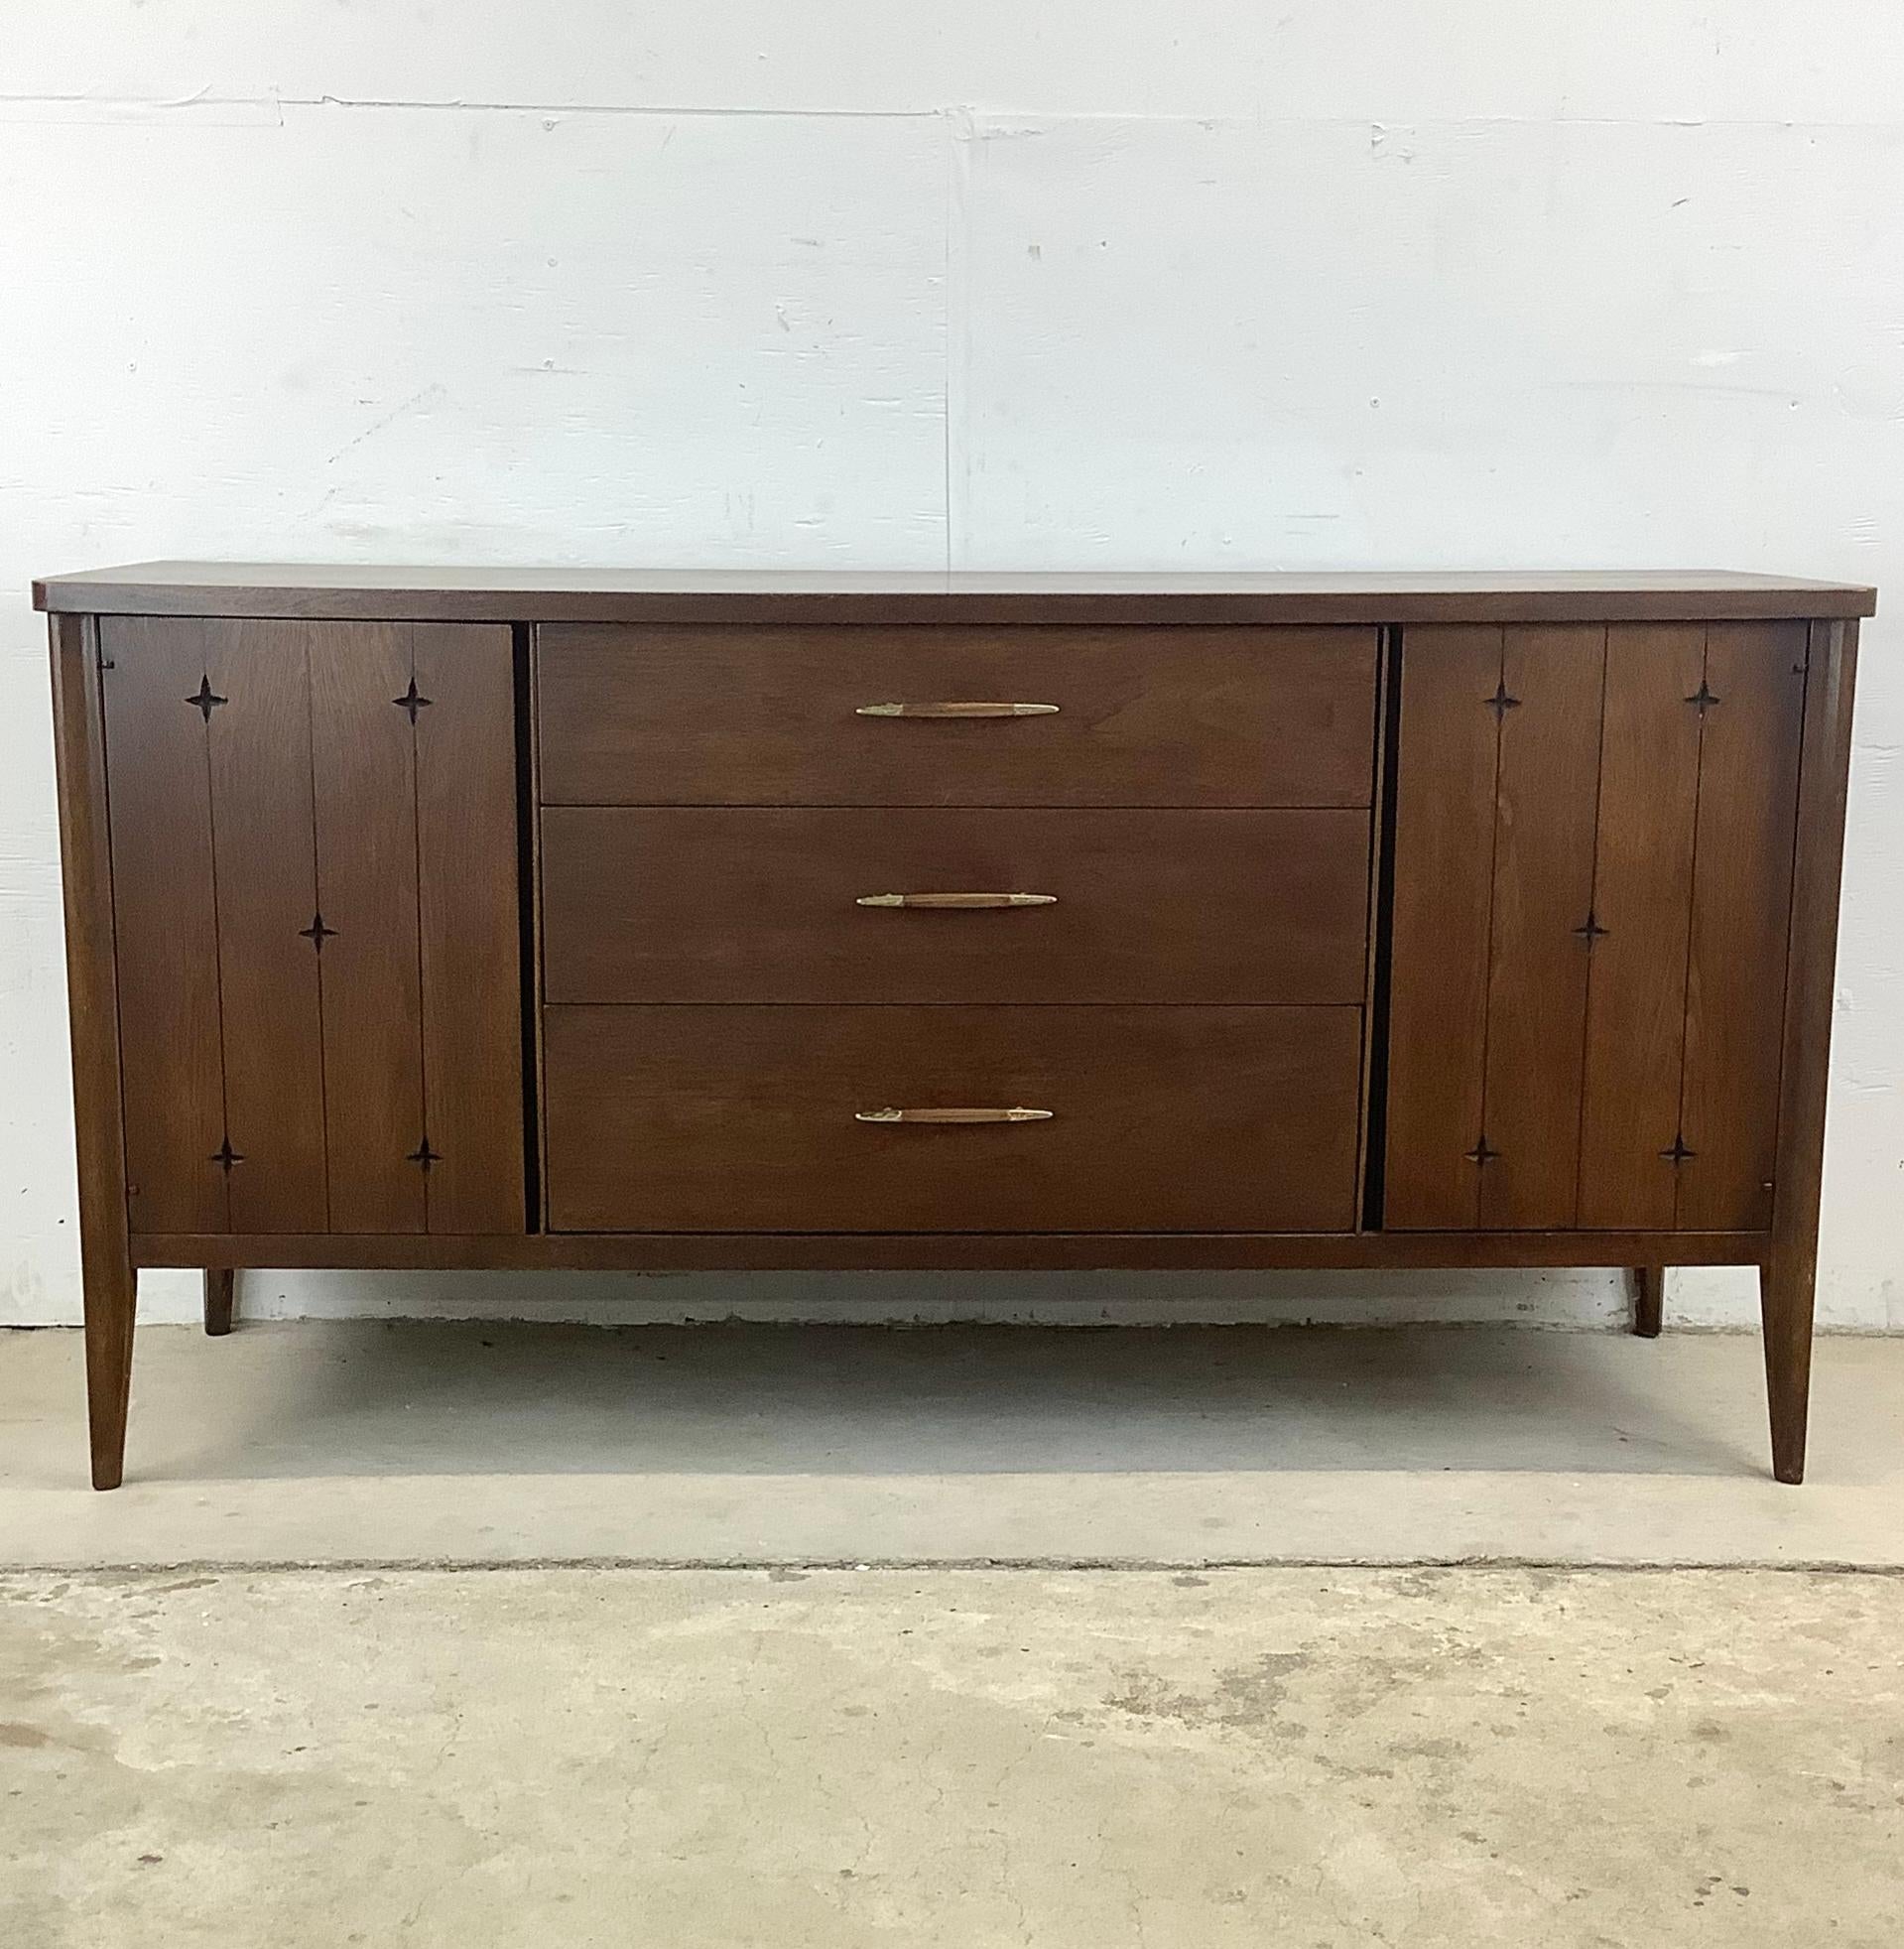 This Mid-Century Broyhill Premier Credenza is a timeless piece of furniture that brings both mcm style and optimal functionality to your home. Crafted with the quality craftsmanship and sleek design characteristic of Broyhill's Premier line, this